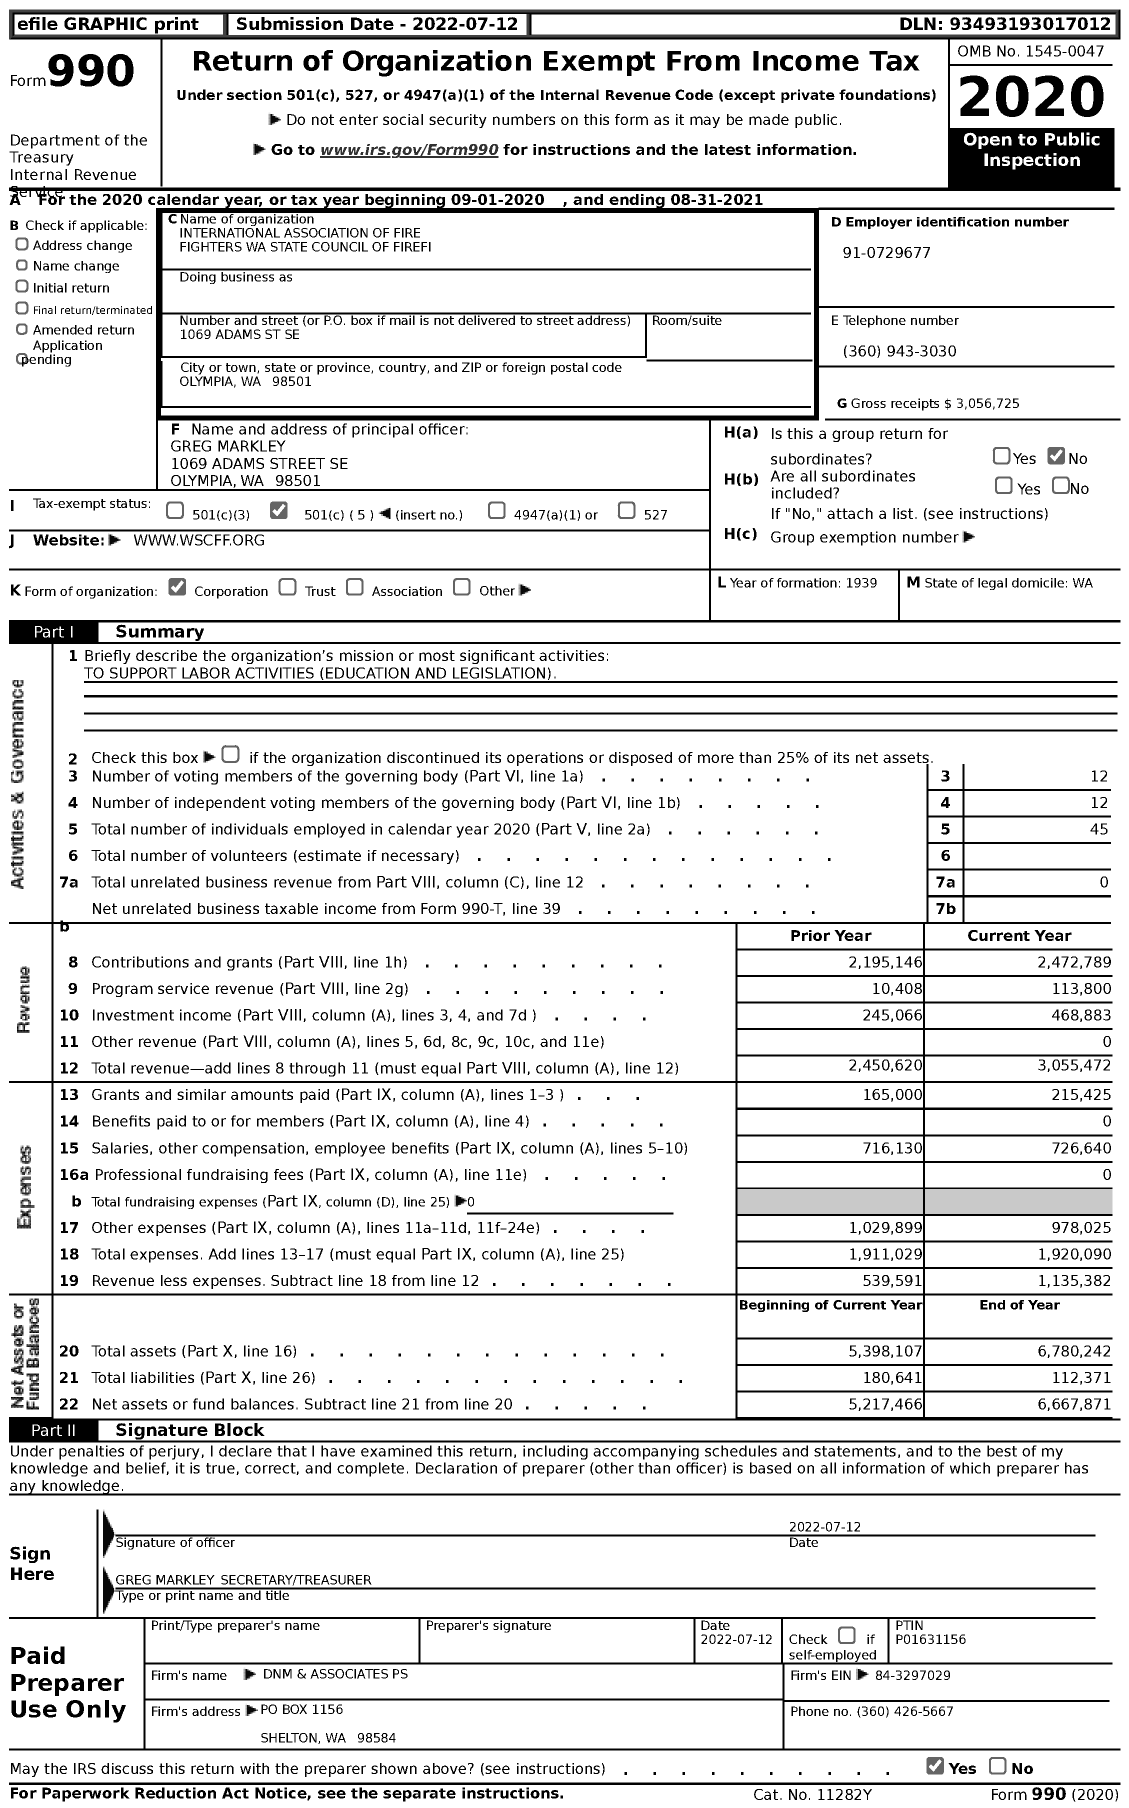 Image of first page of 2020 Form 990 for International Association of Fire Fighters - A0045 Washington State Council of F